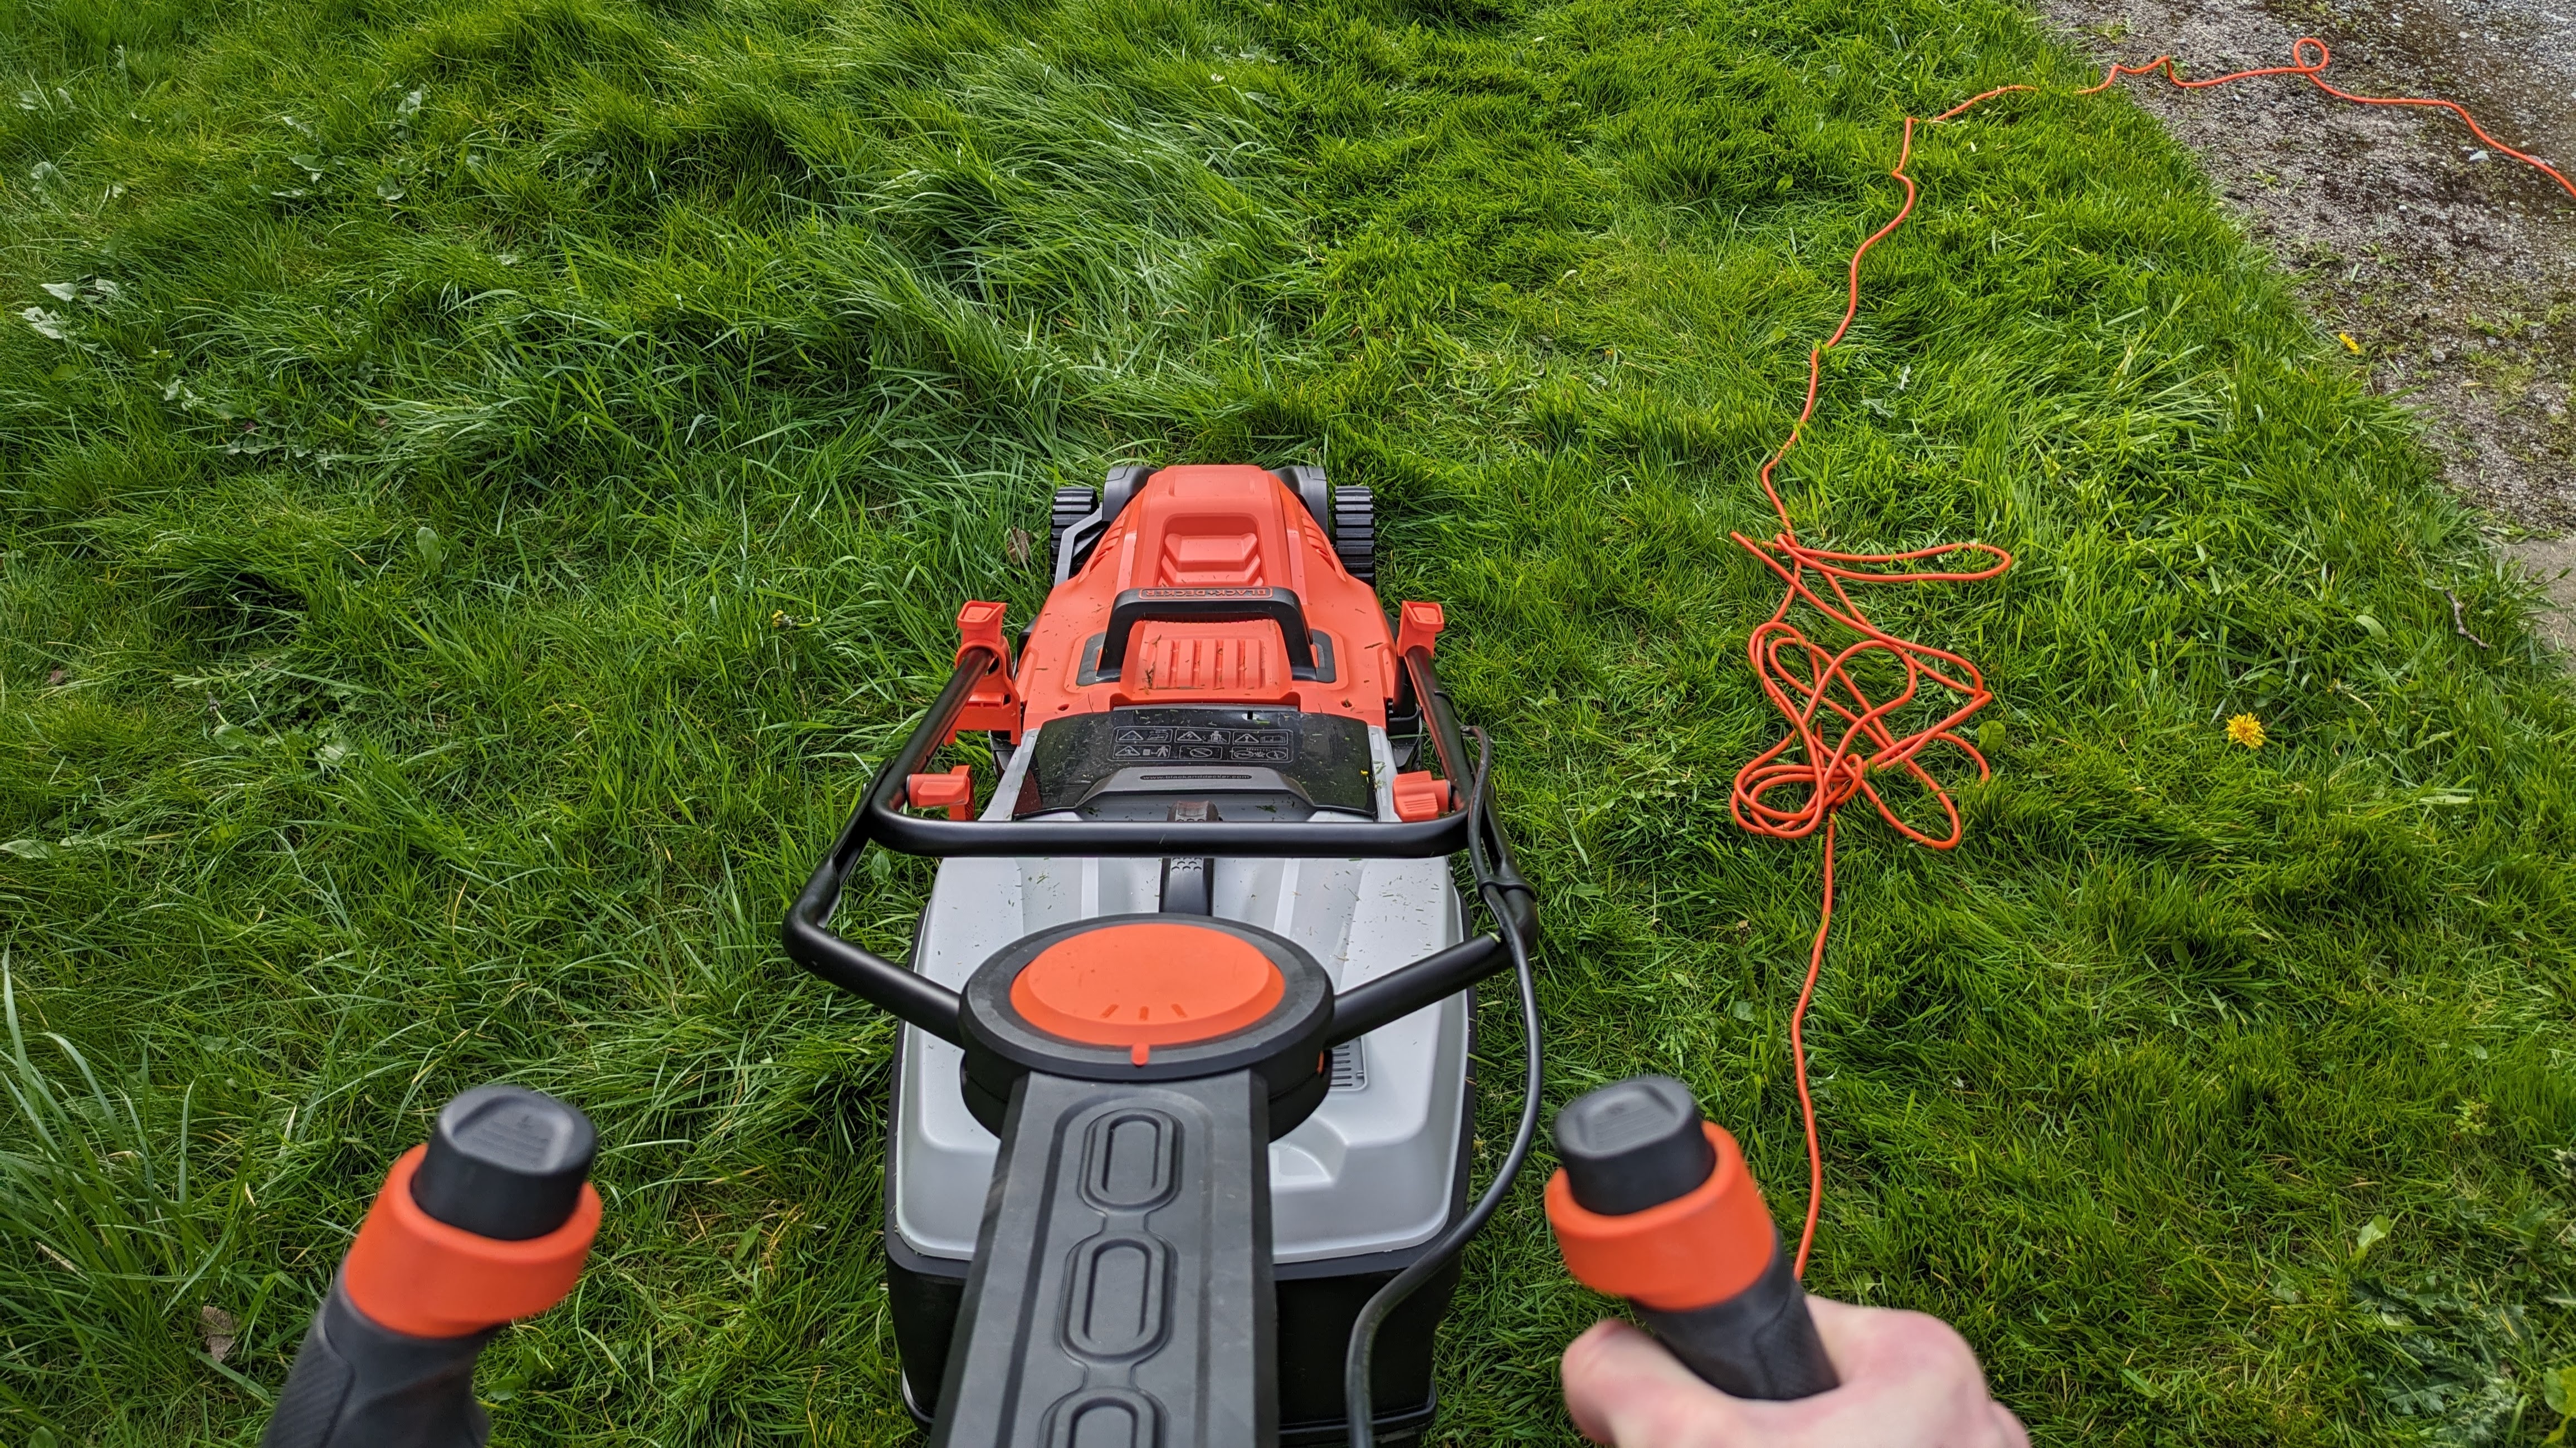 You need to stay mindful of the power cable on Black + Decker's corded electric mower.